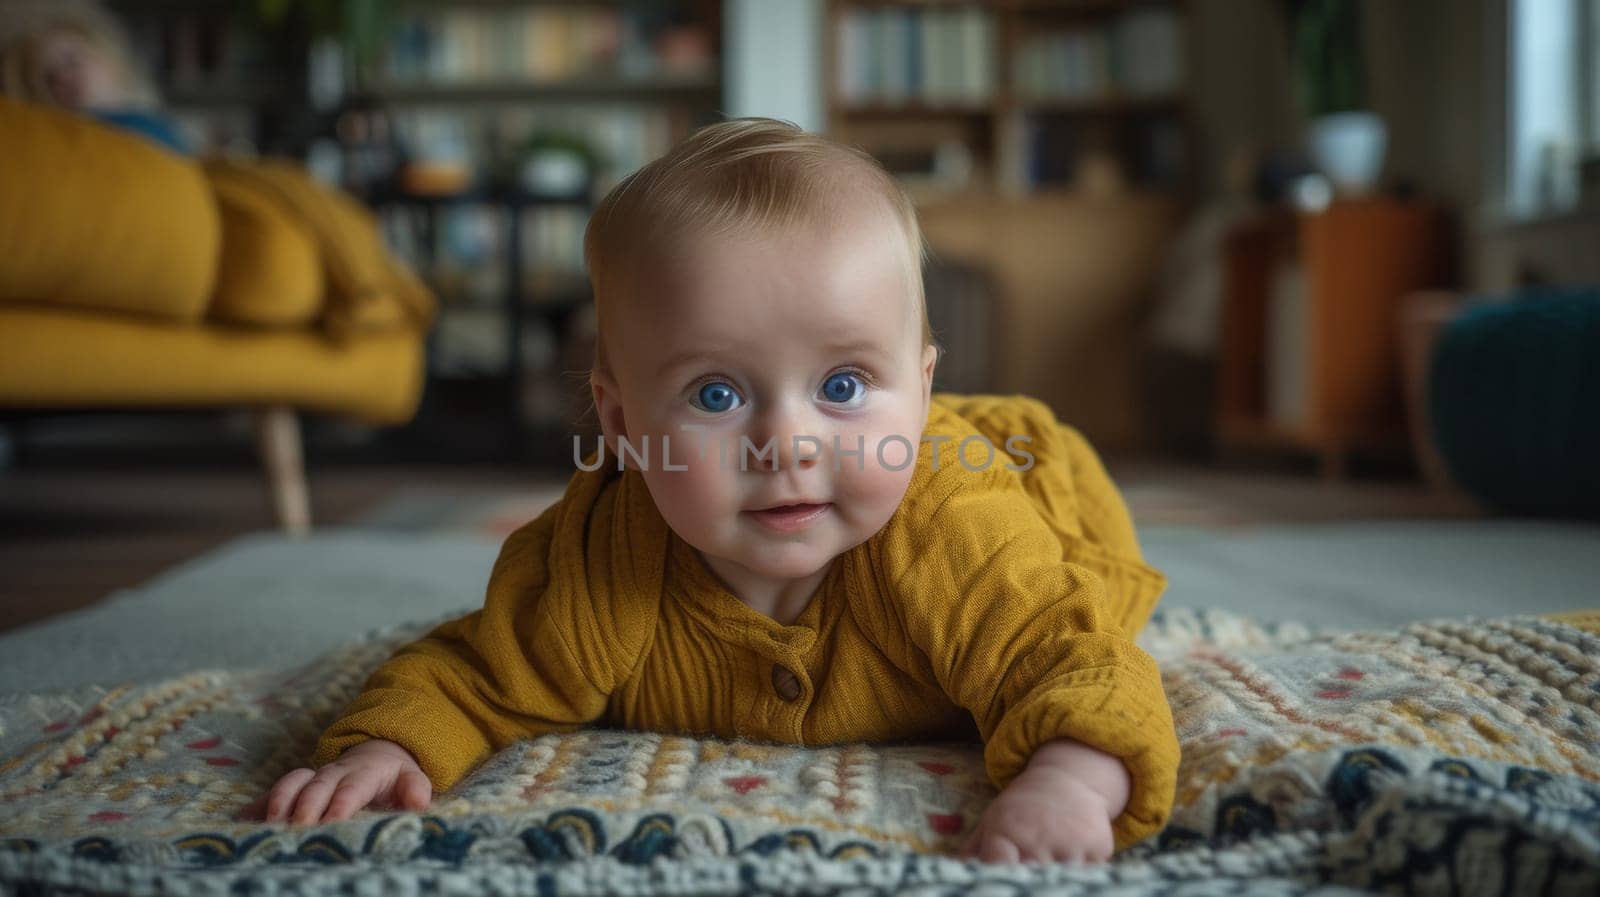 A baby in a yellow sweater laying on the floor, AI by starush